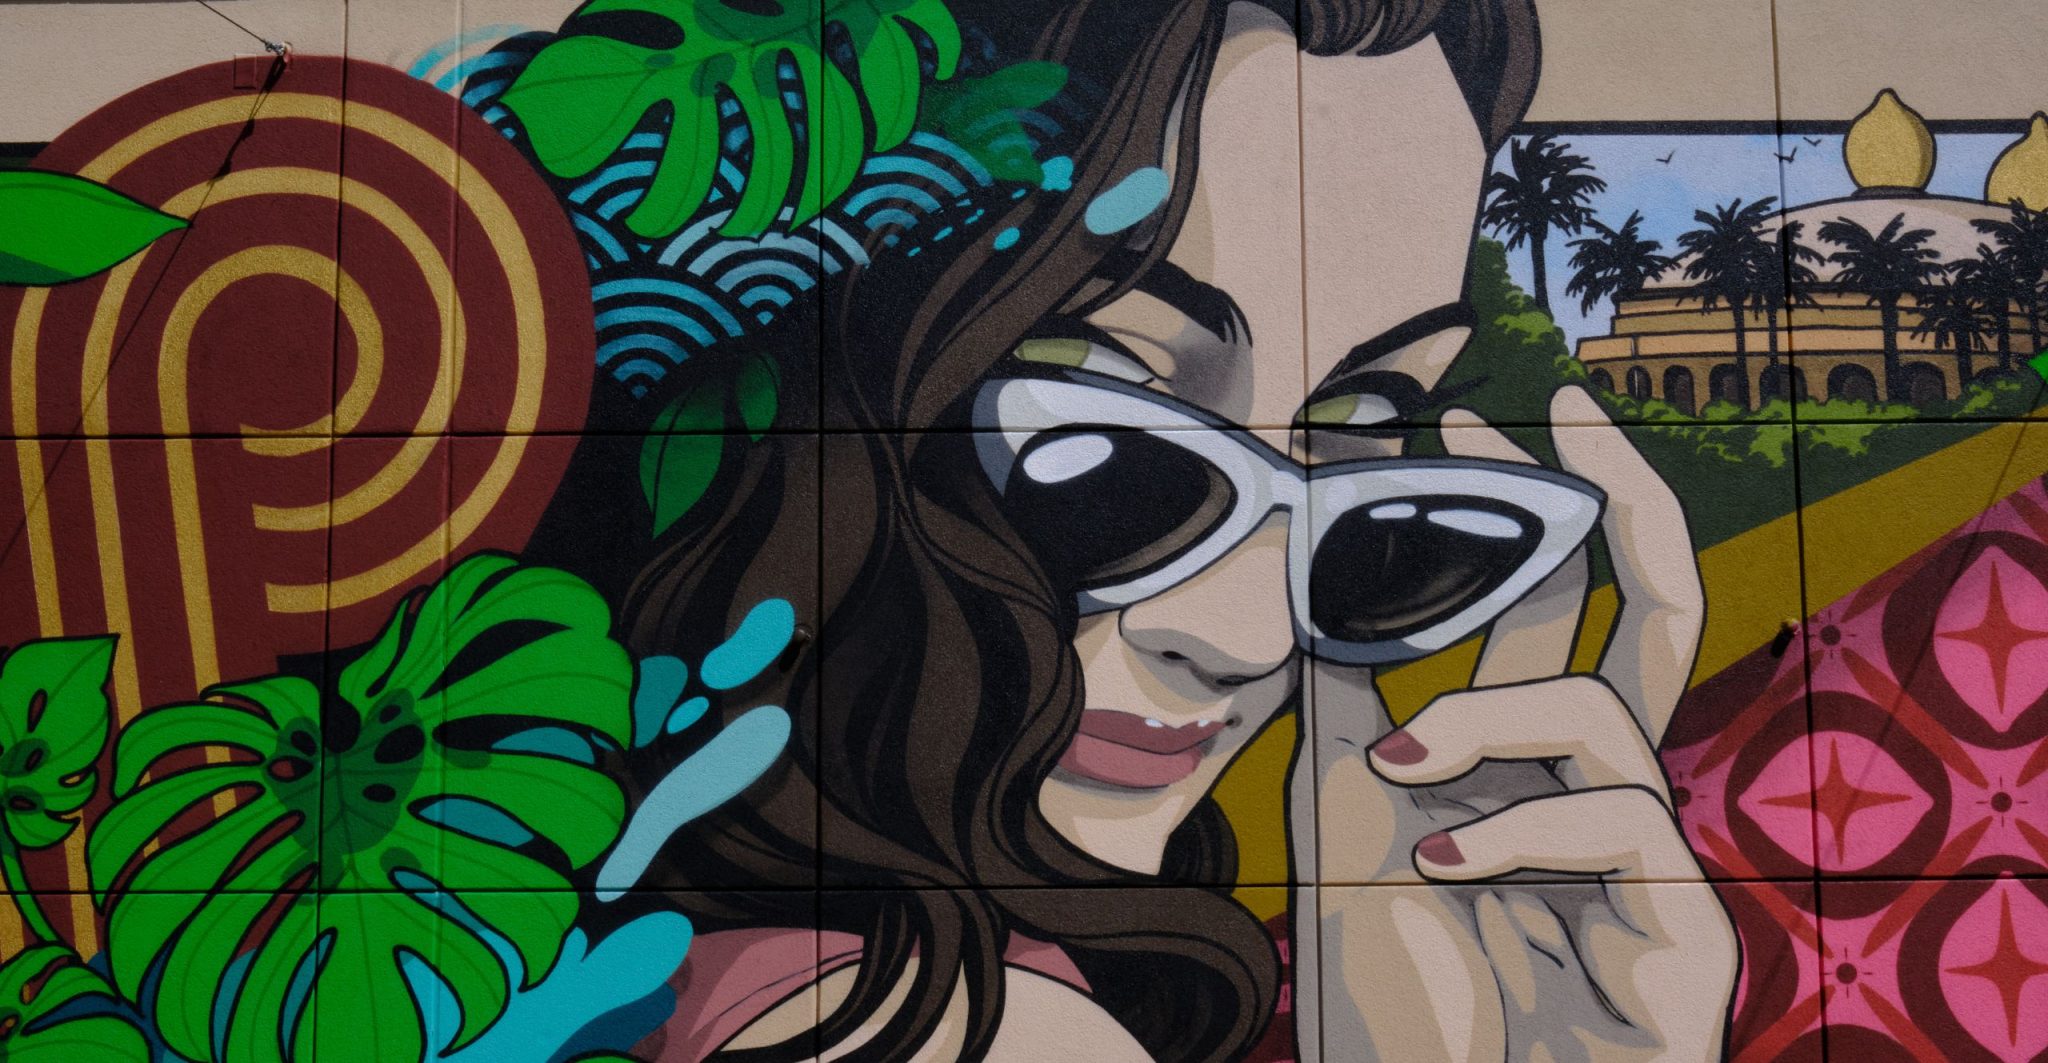 Painted mural of a woman pulling her sunglasses down with tropical leaves and flowers around her